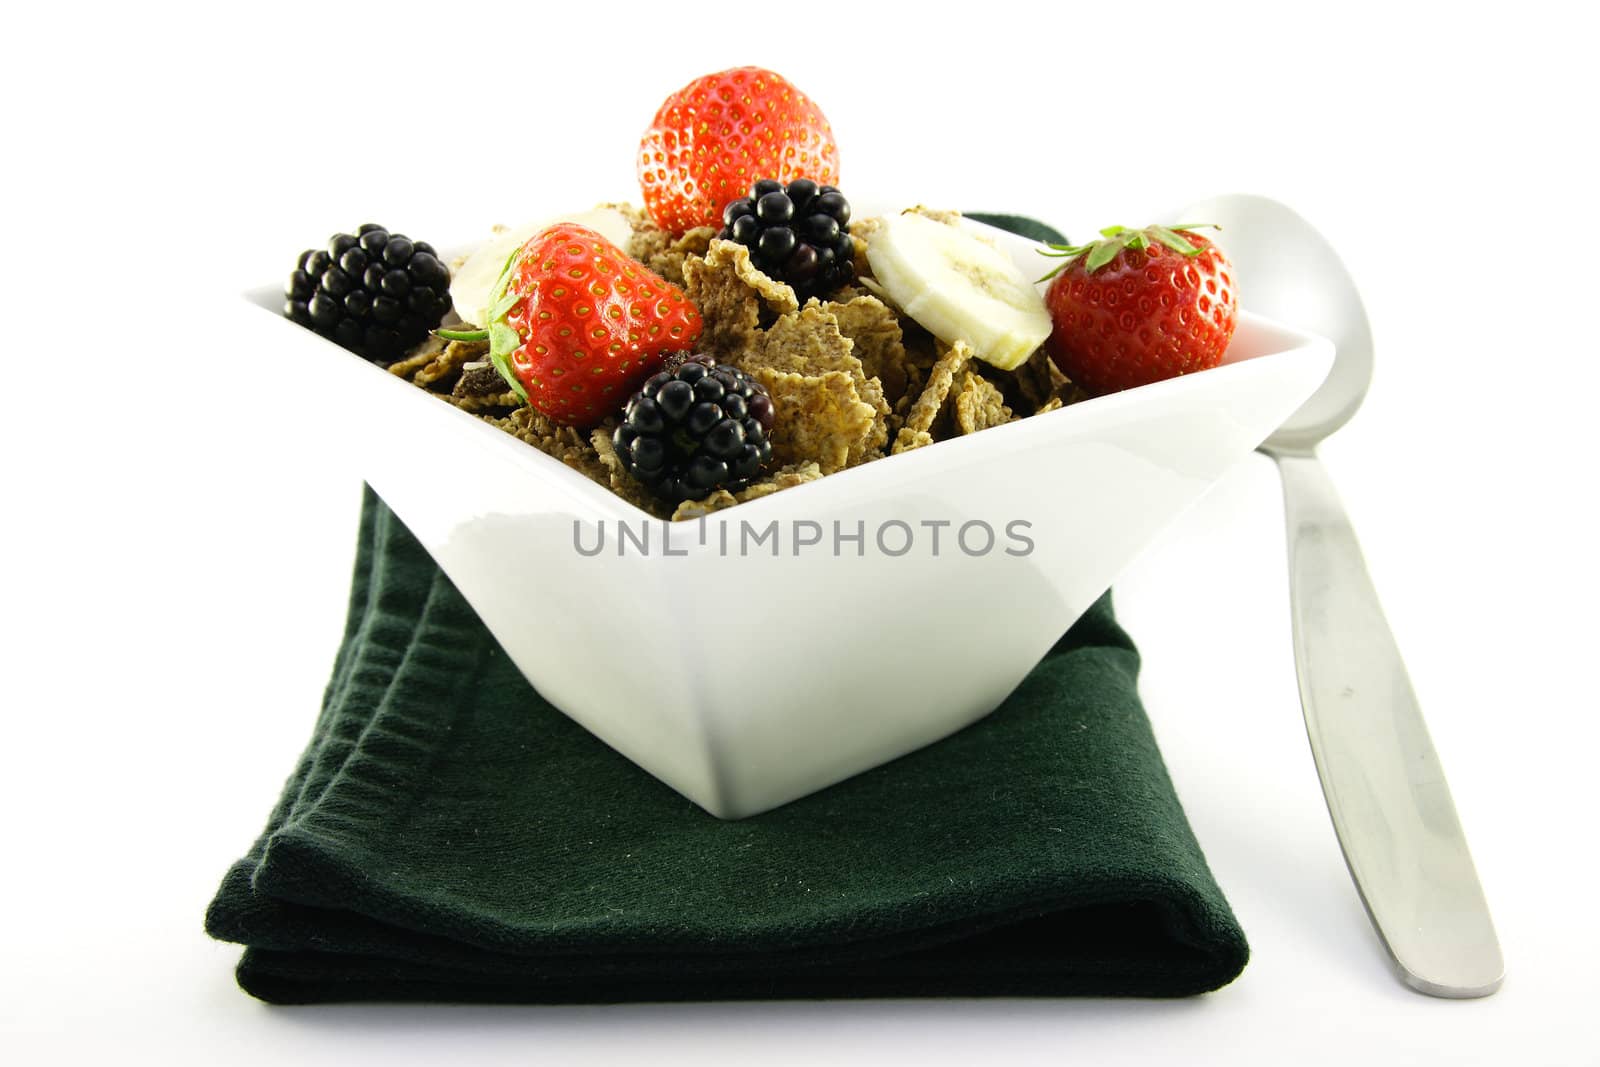 Crunchy delicious looking bran flakes and juicy fruit in a white bowl with a spoon and a black napkin on a white background